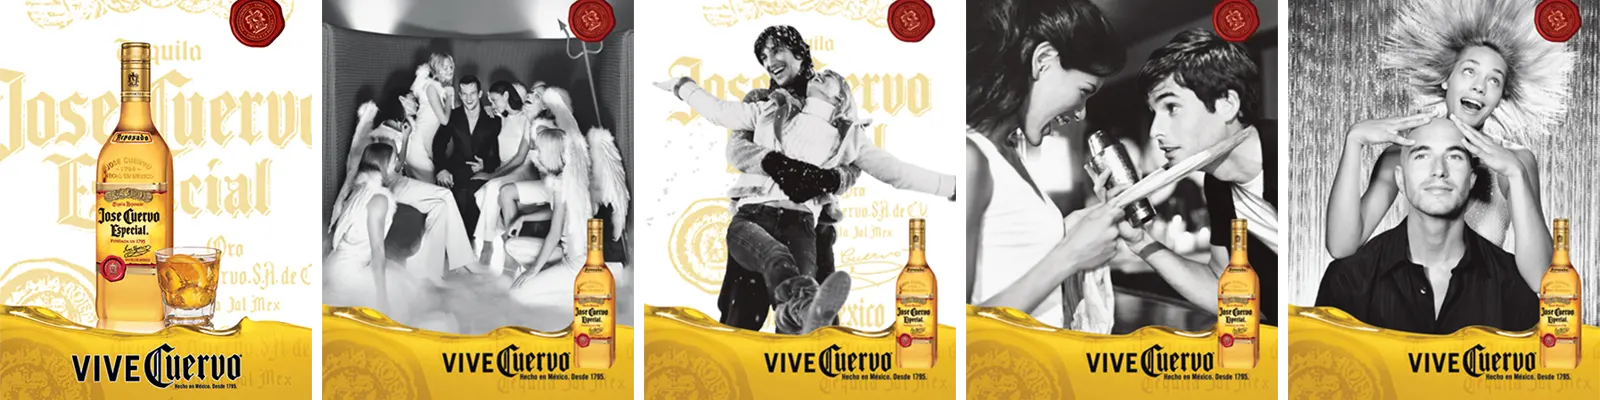 Jose Cuervo Package Design Agency - ADDVALUN by INTERDCOMM